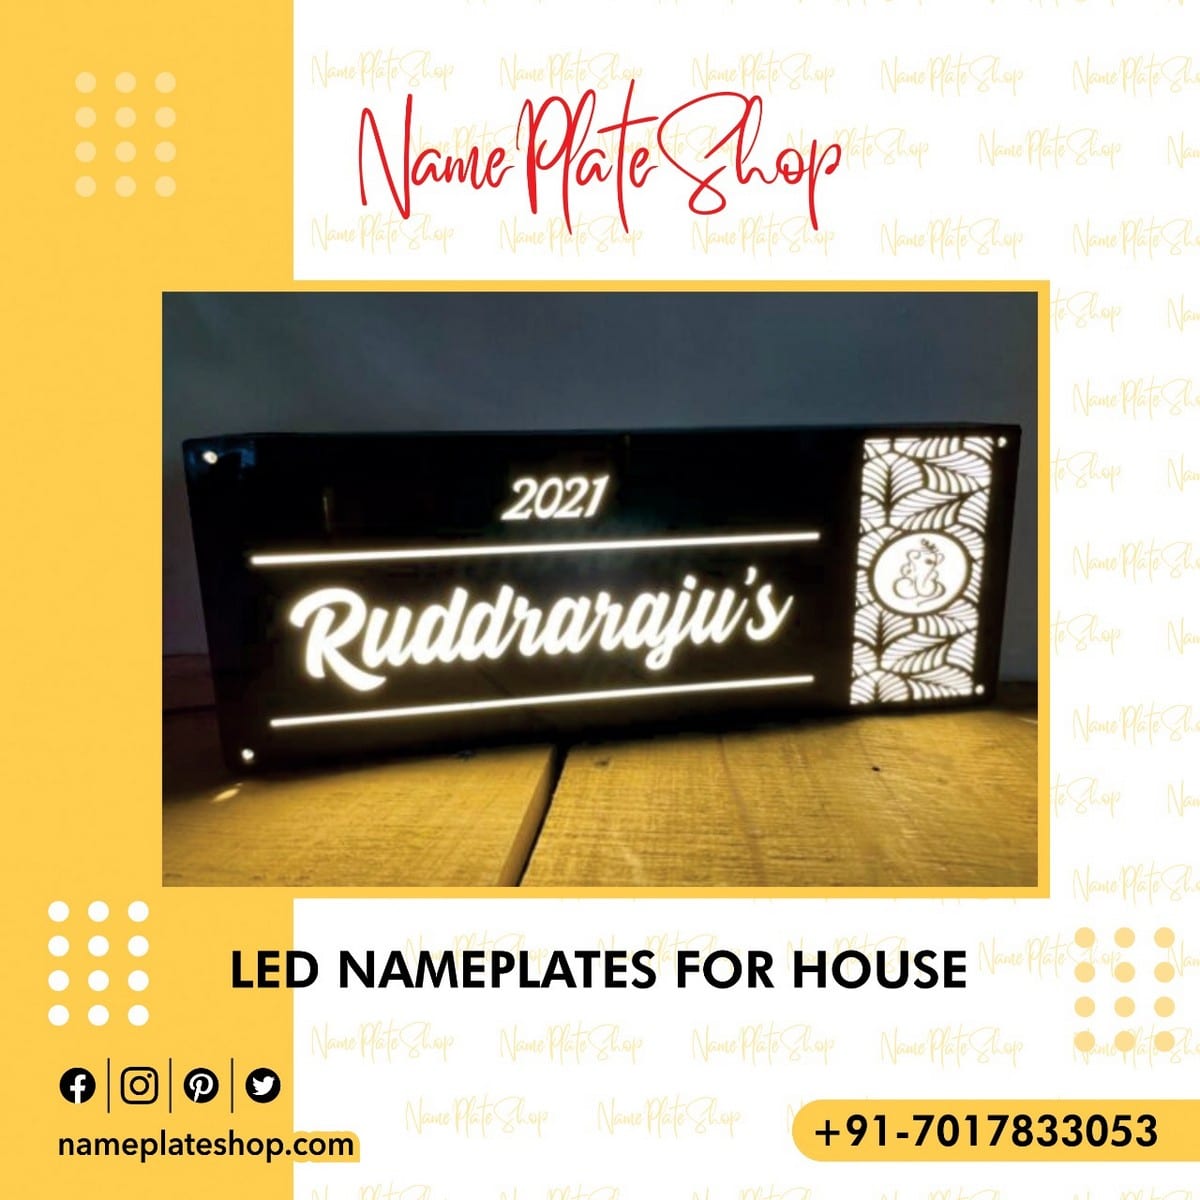 Buy Led Name Plates For Your House On Nameplateshop.com